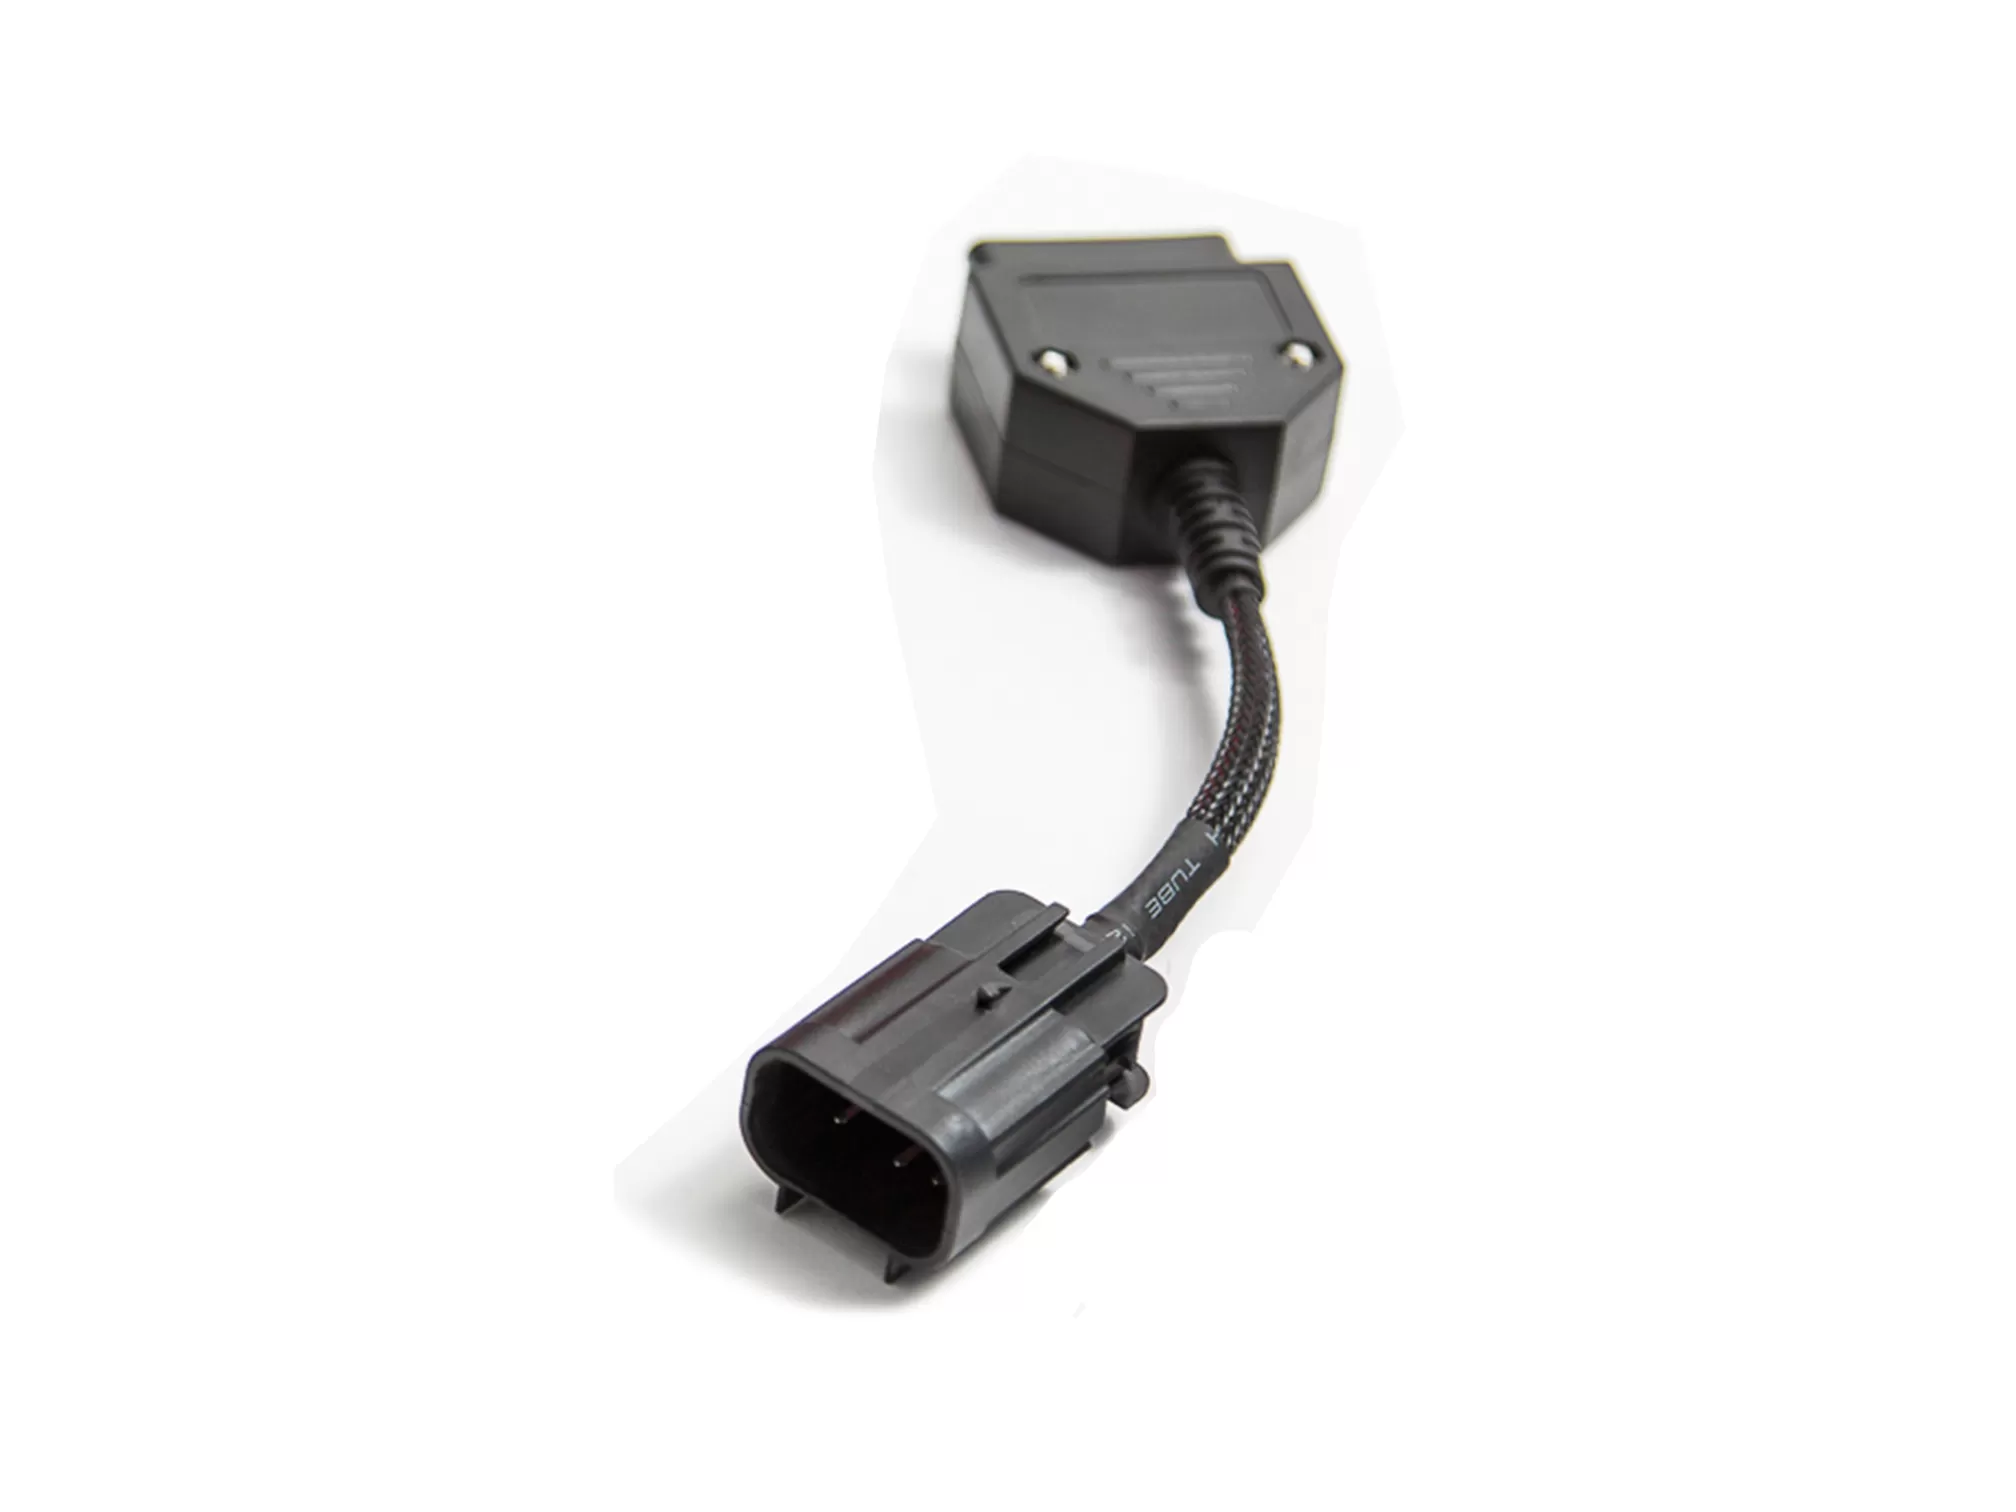 POLARIS ECU FLASH CABLE 16PIN TO 8PIN ADAPTER - VRT-RZR-CABLE